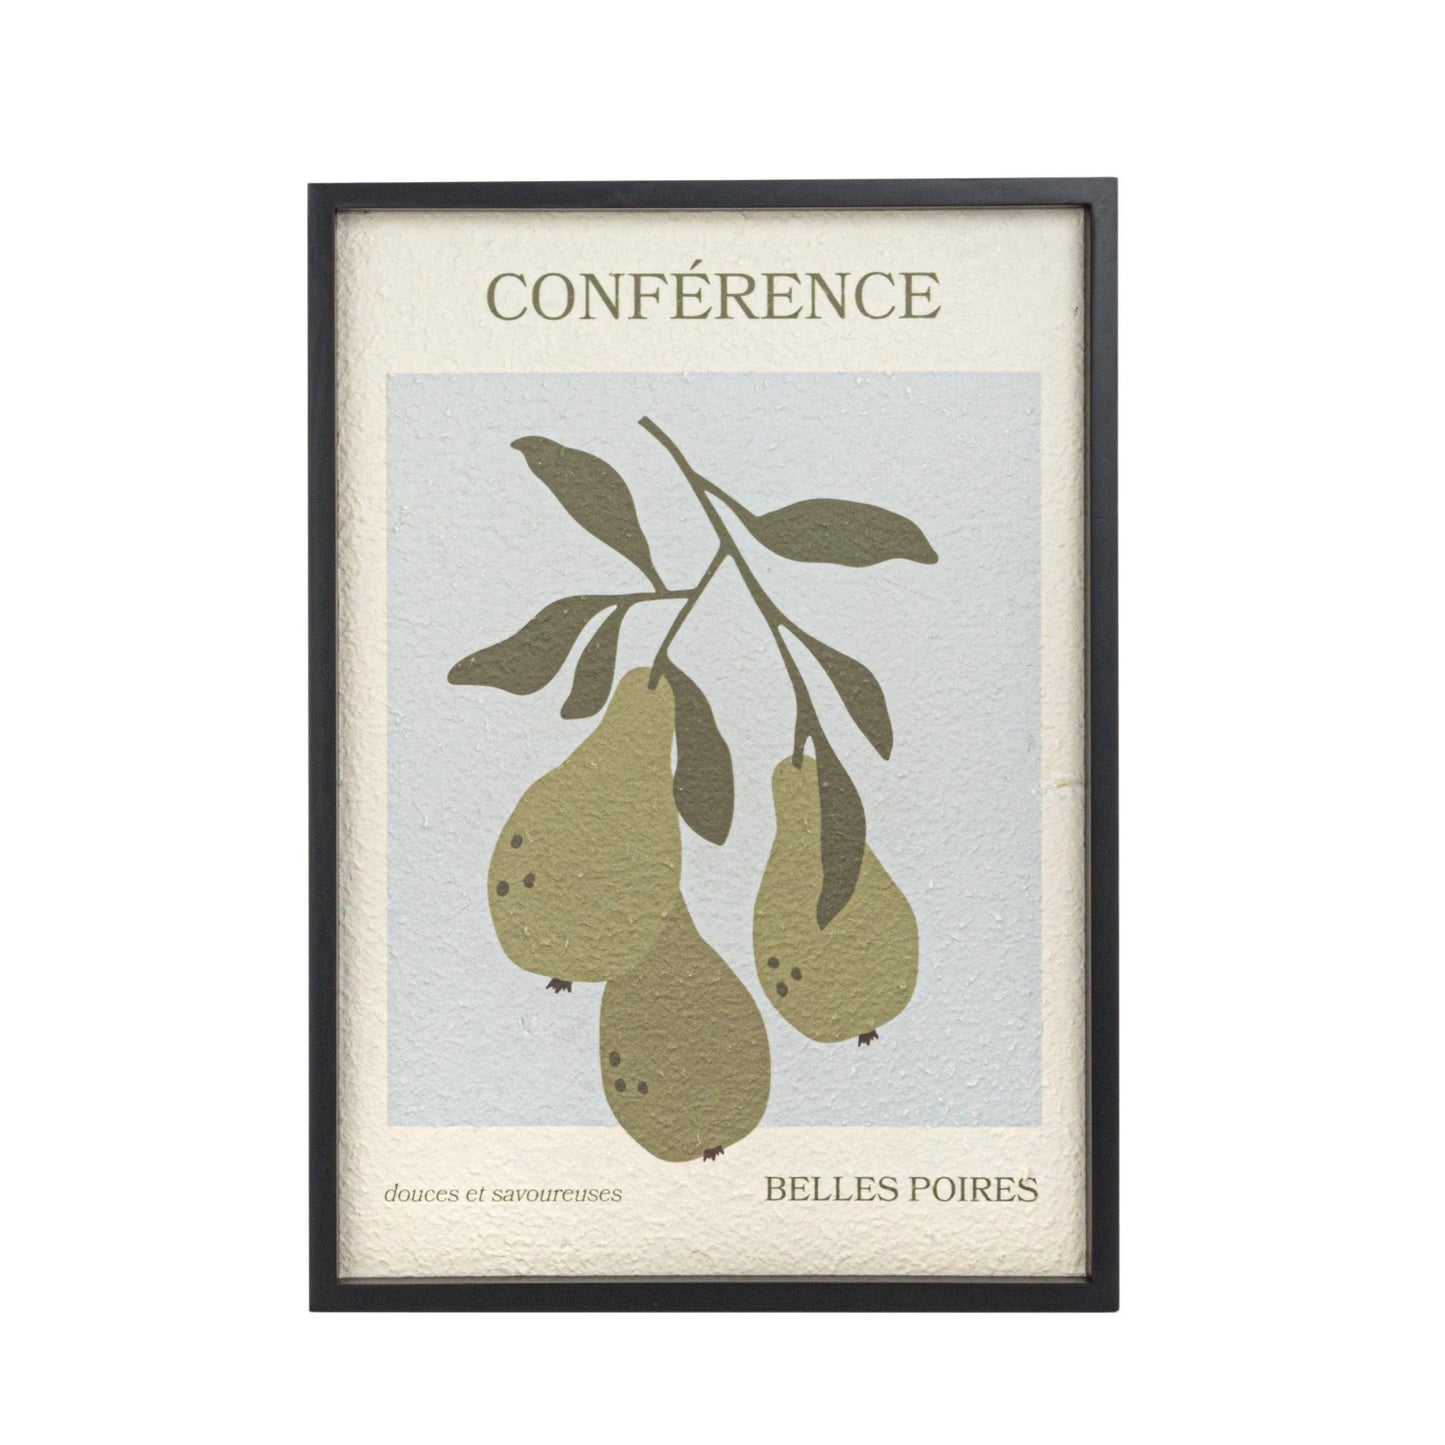 Wood Framed Textured Paper Wall Décor w/ Pears "Conférence"